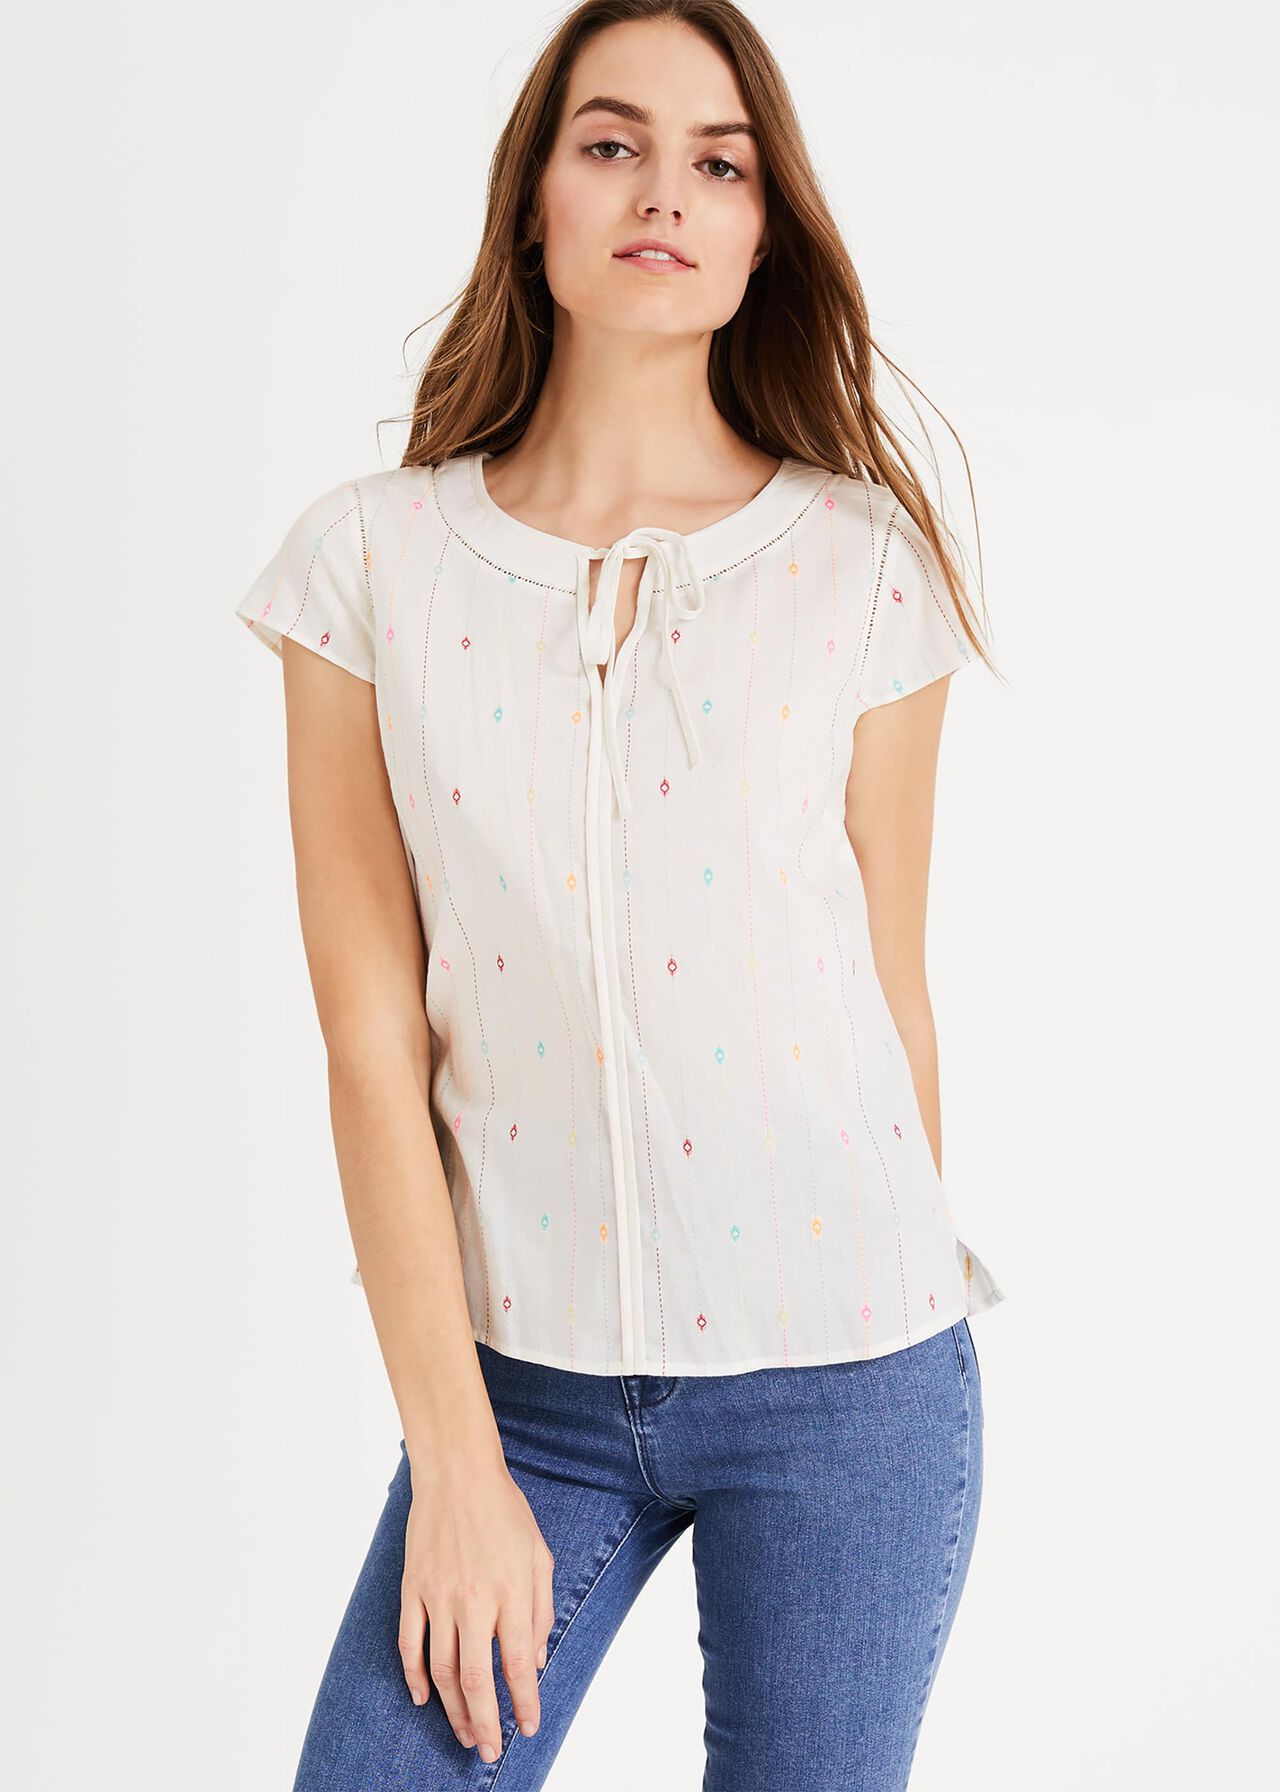 Helen-Lucy Blouse